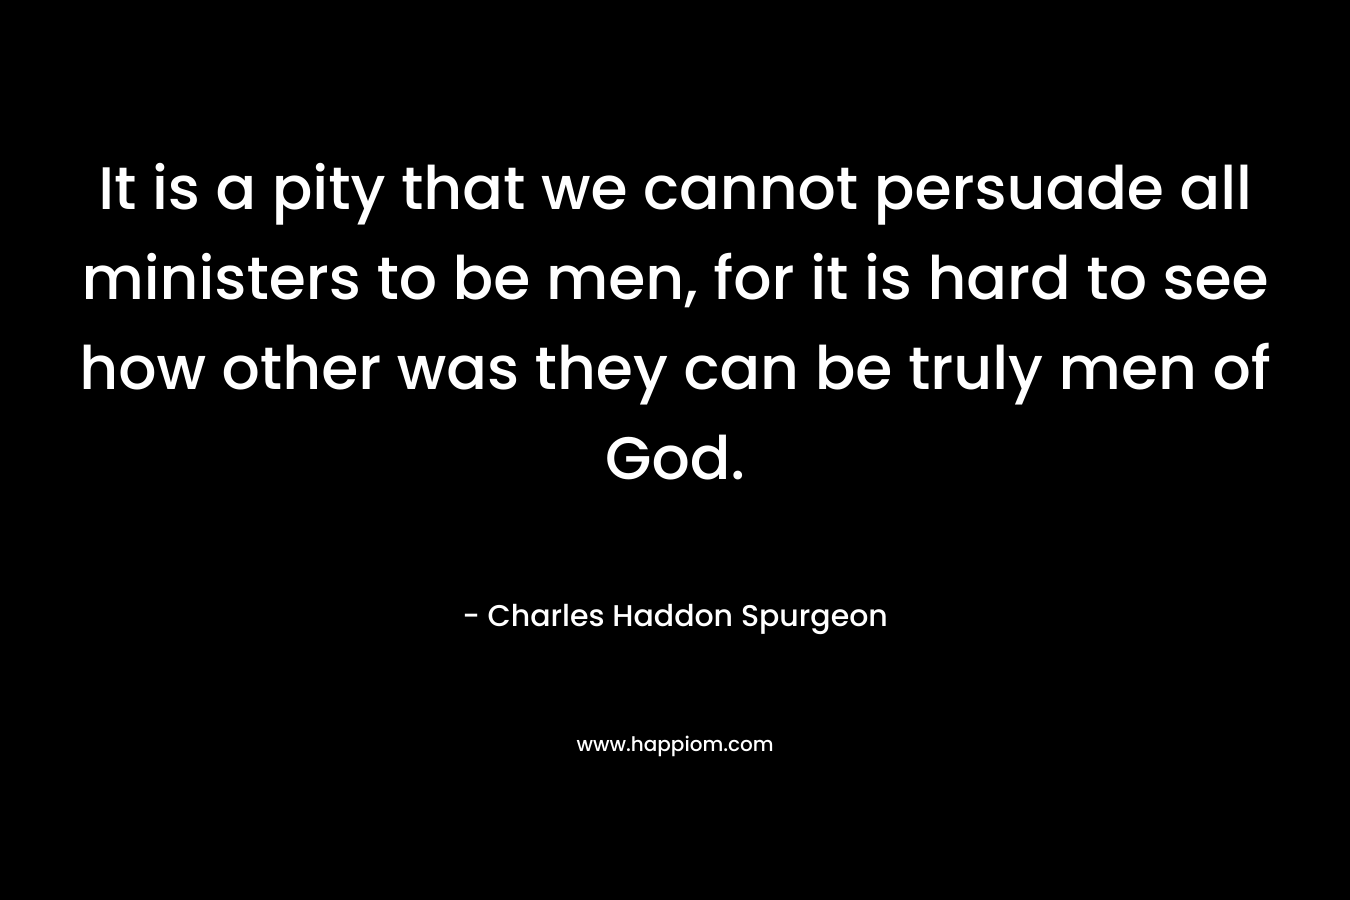 It is a pity that we cannot persuade all ministers to be men, for it is hard to see how other was they can be truly men of God.